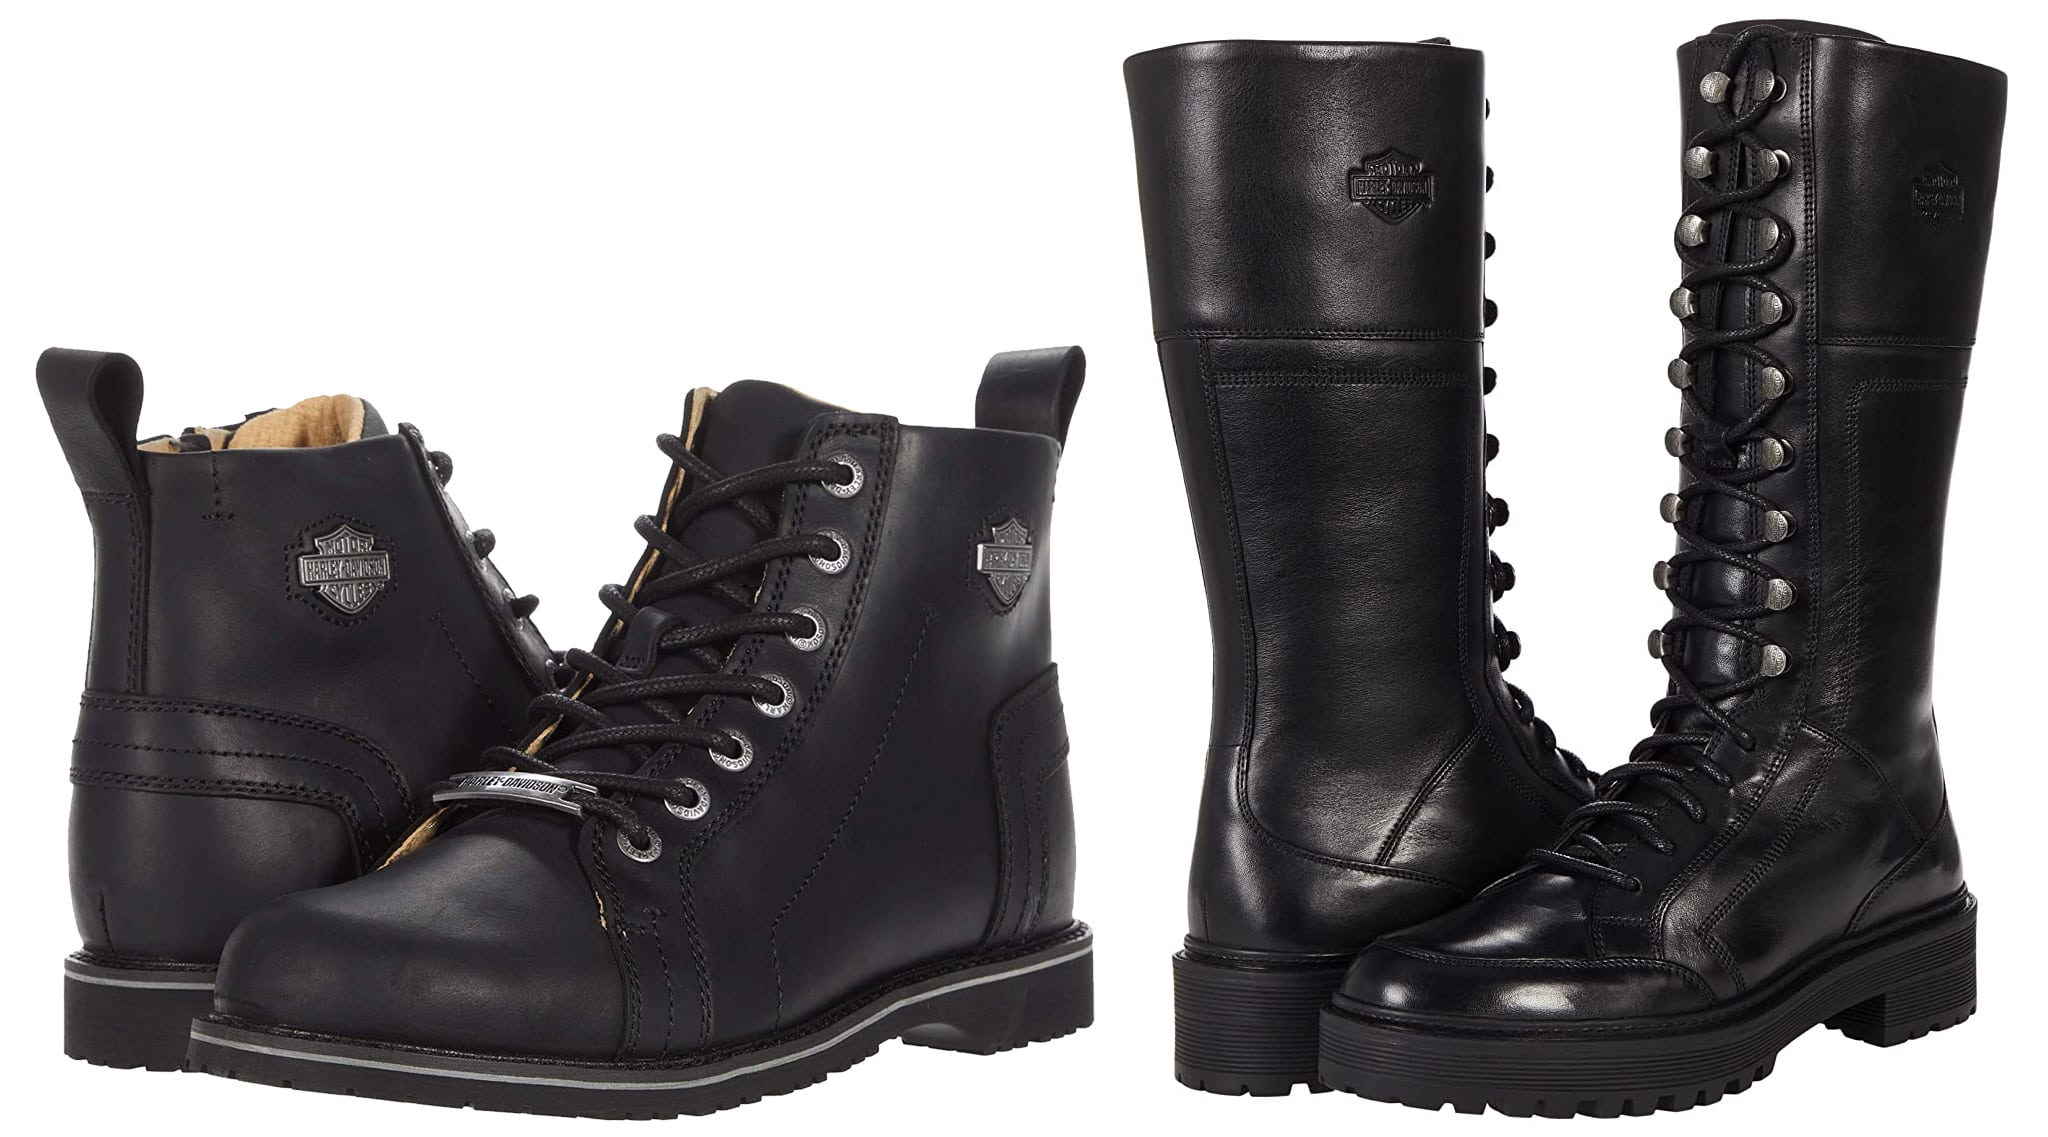 Harley Davidson boots provide protection, functionality, and style